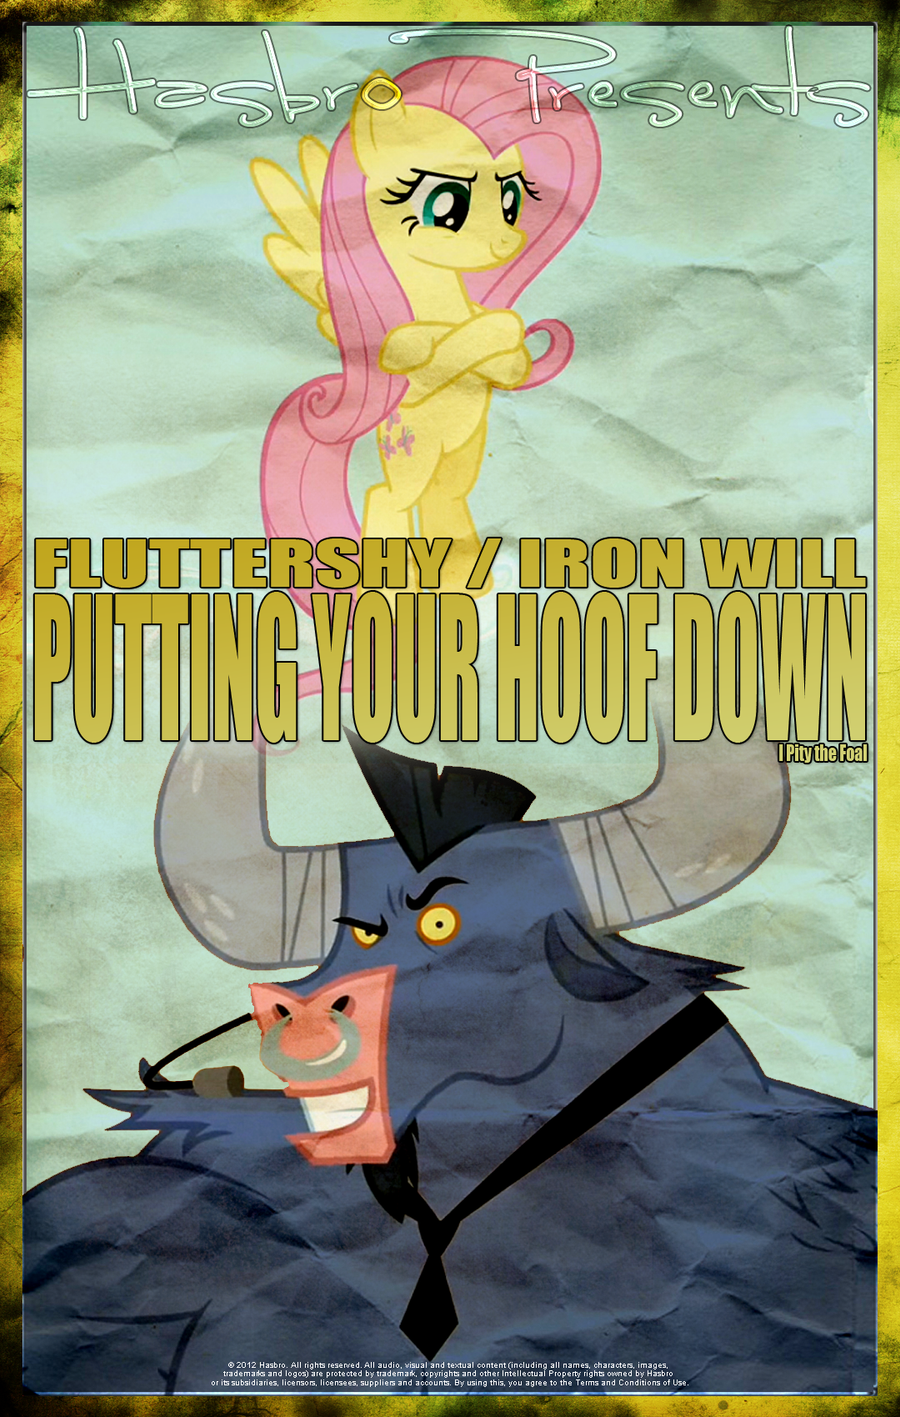 mlp___putting_your_hoof_down___movie_poster_by_pims1978-d53tvu9.png